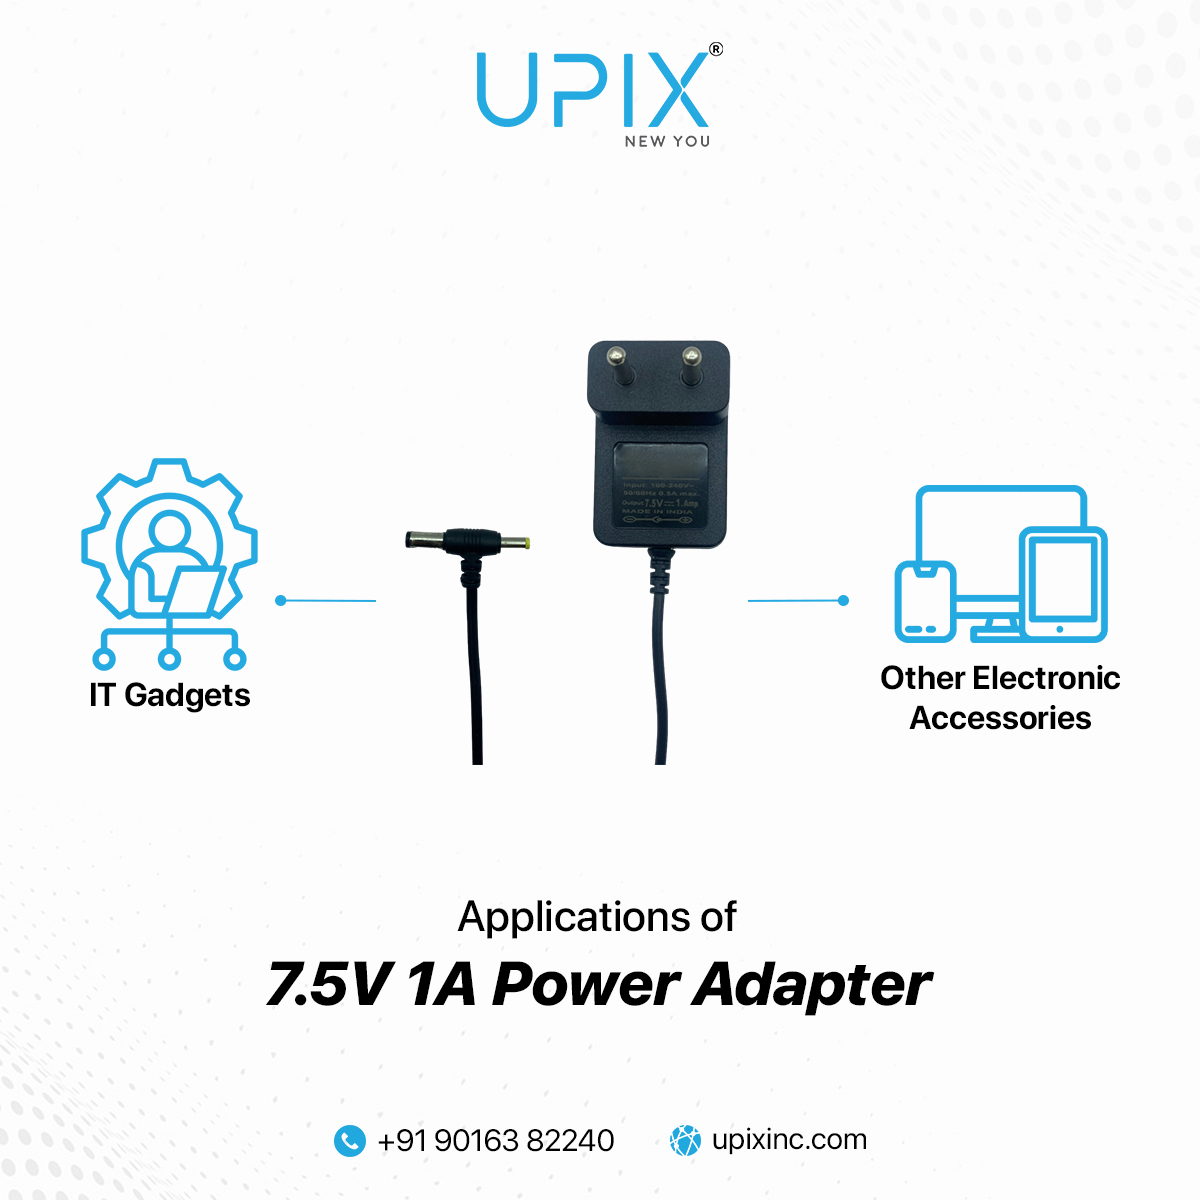 Power your devices with peace of mind! Upix®️ 7.5V 1A Power Adapter is engineered for performance and built to last.

To know more, visit- upixinc.com or WhatsApp Now wa.me/919016382240
.
#upixinc #PowerWithPeaceOfMind #ContinuousPower #StayConnected #FastCharge